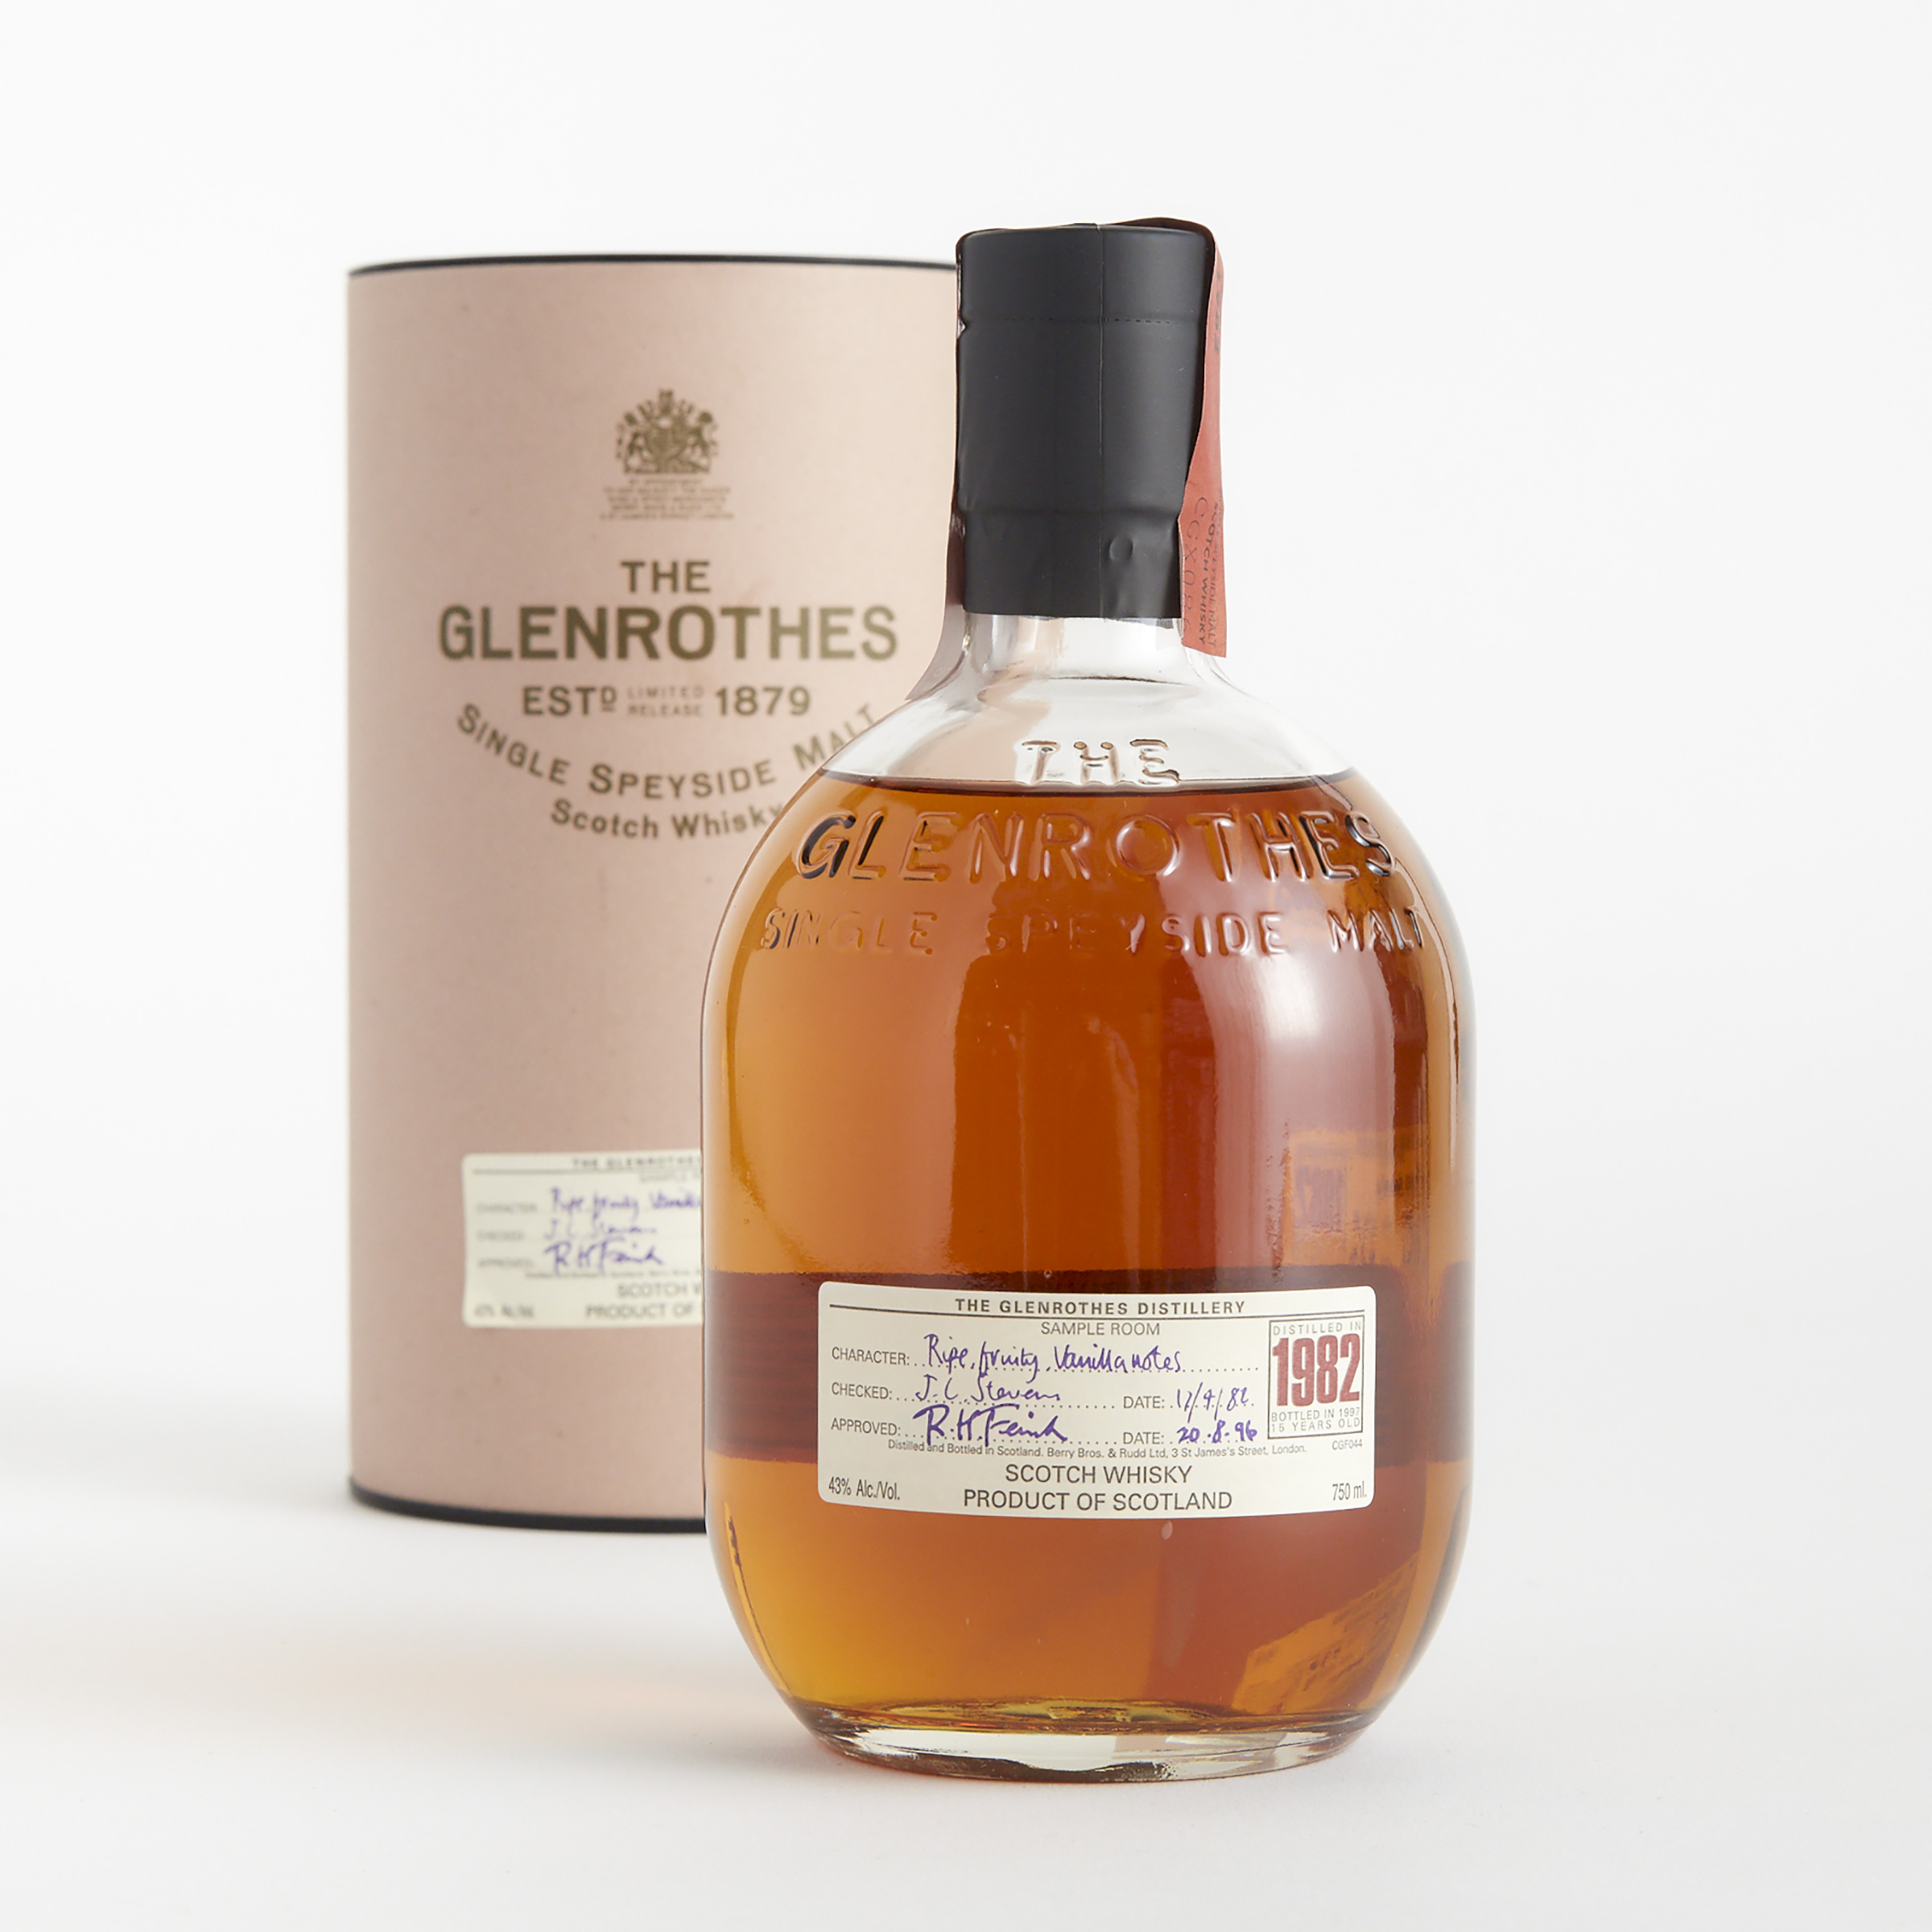 THE GLENROTHES SINGLE SPEYSIDE SCOTCH WHISKY 15 YEARS (ONE 750 ML)